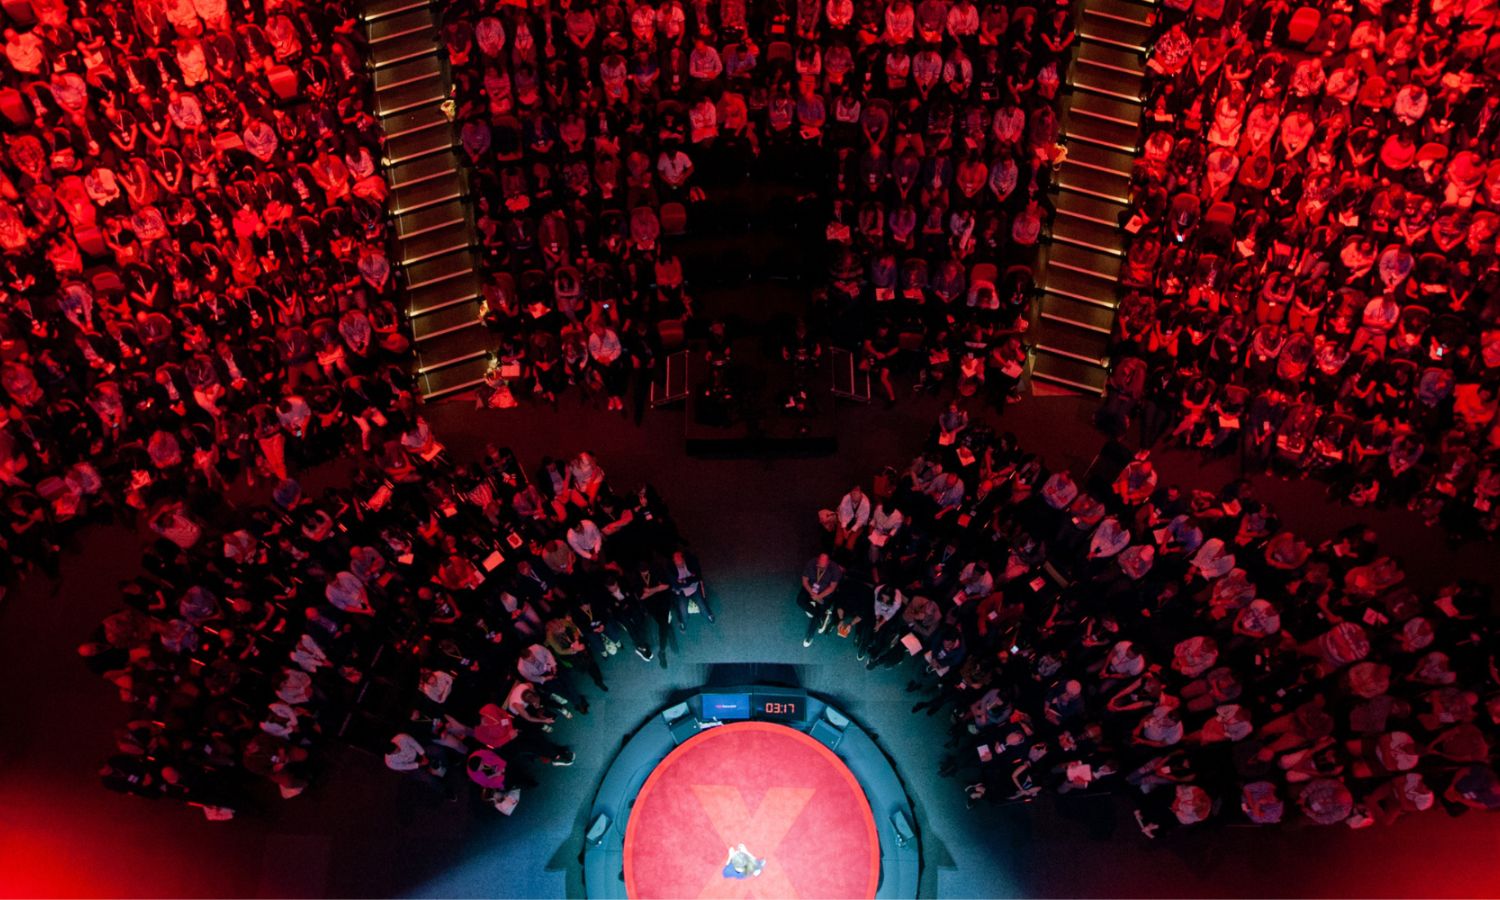 An image showing someone speaking at TEDxSydney